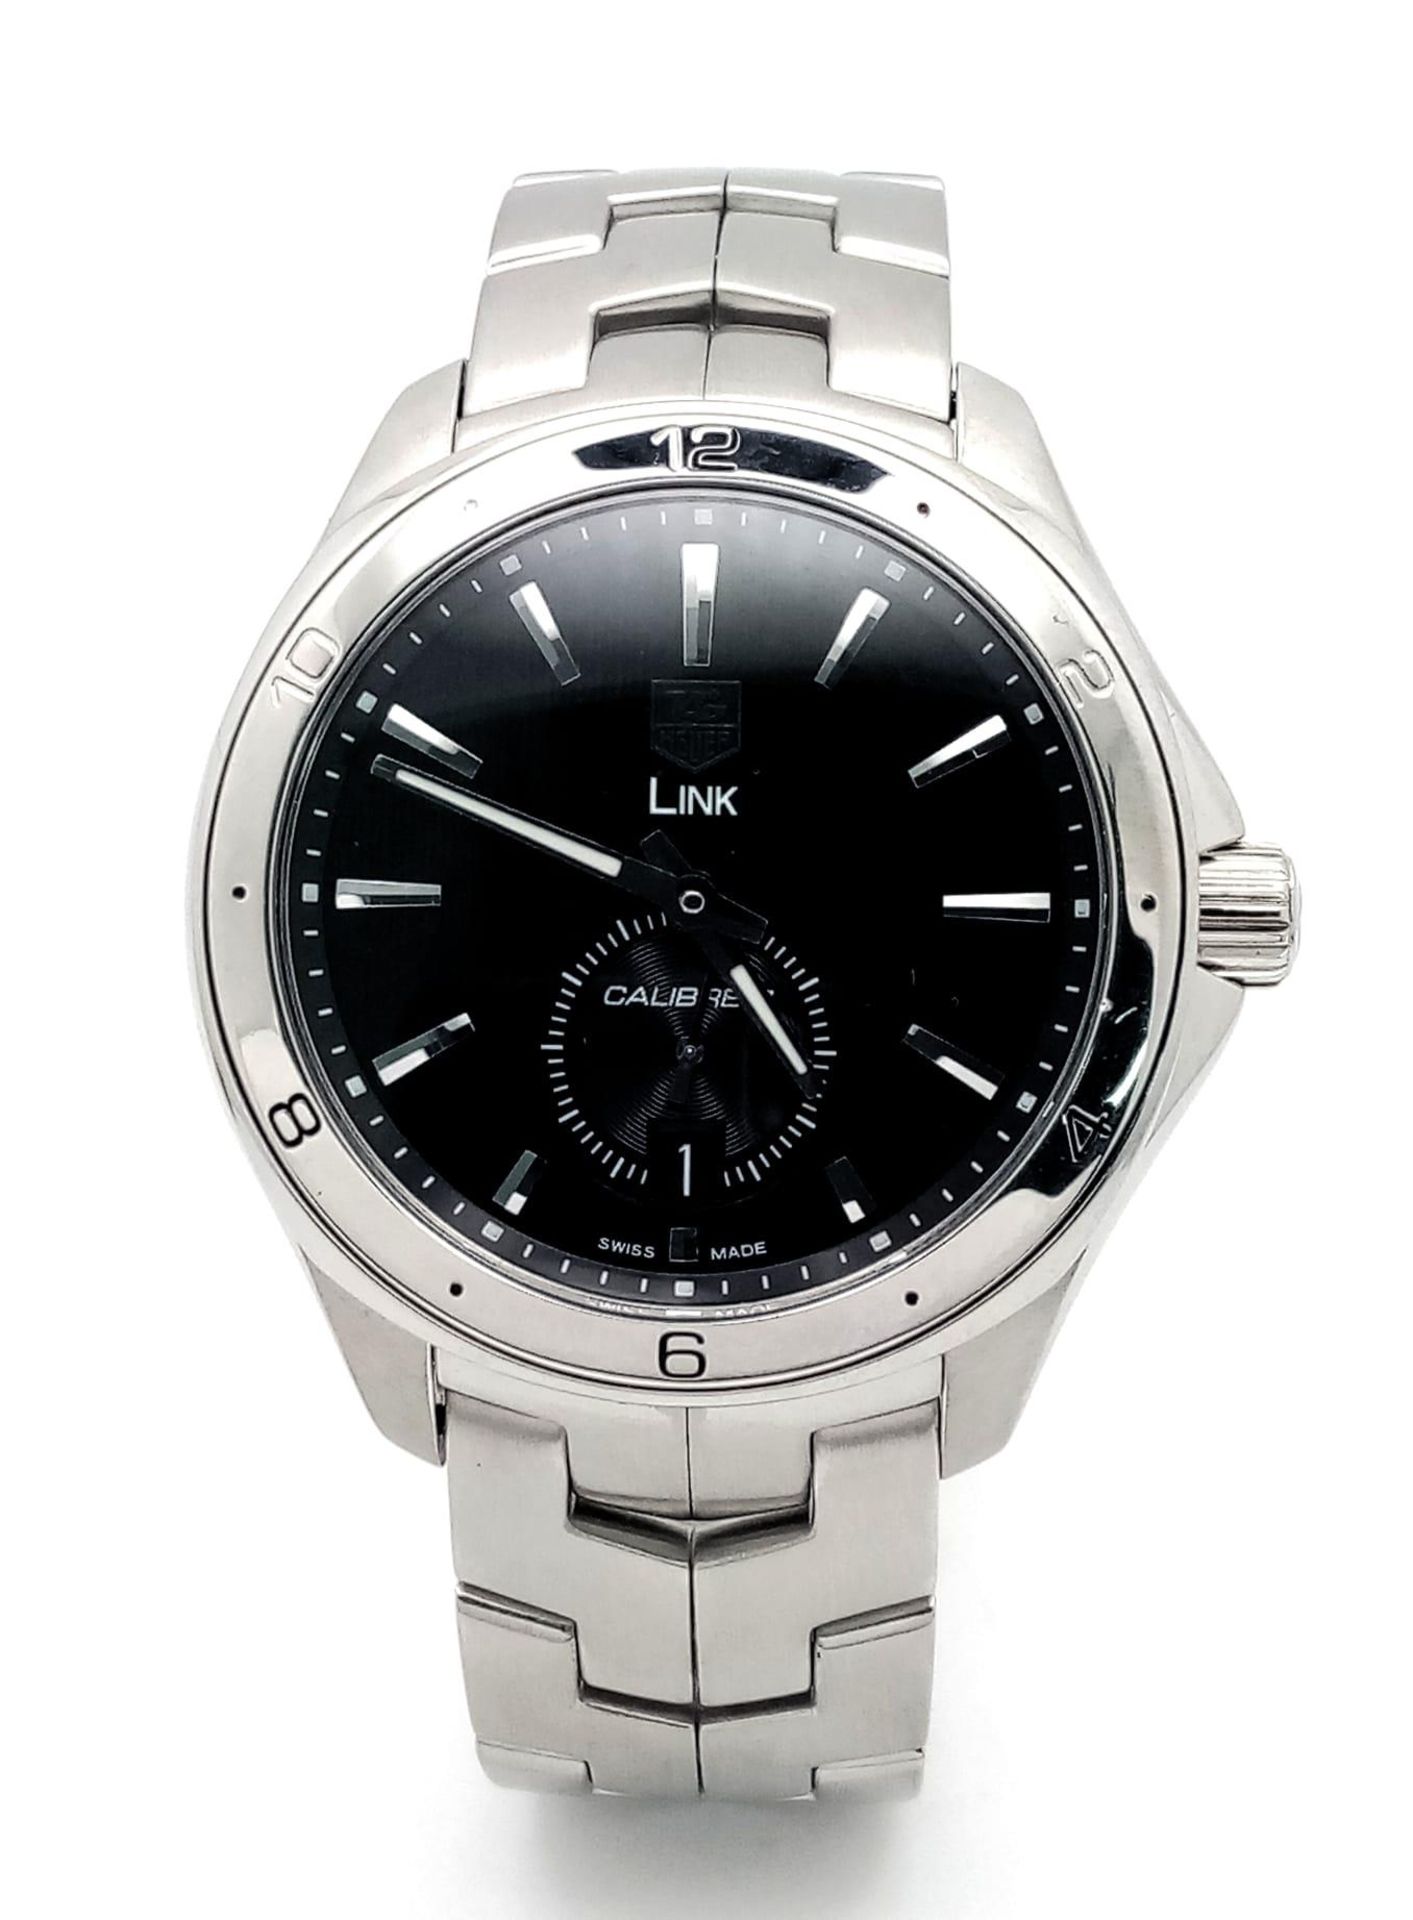 A Tag Heuer Link Calibre 6 Automatic Watch. Stainless steel bracelet and case - 41mm. Black dial - Bild 3 aus 9